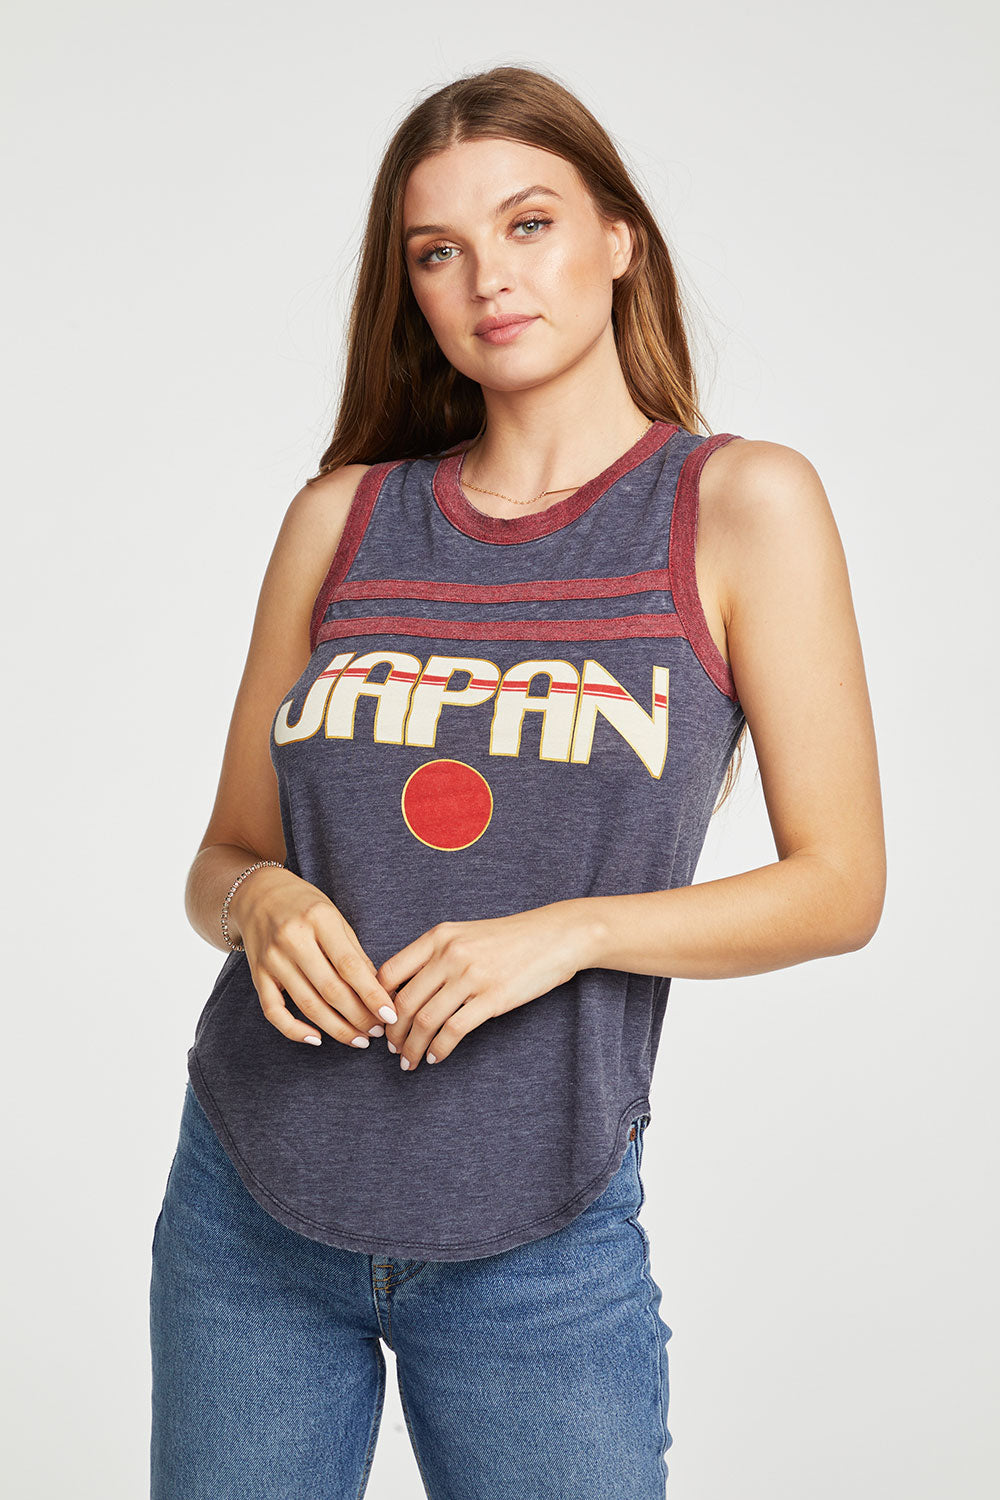 Japan WOMENS - chaserbrand